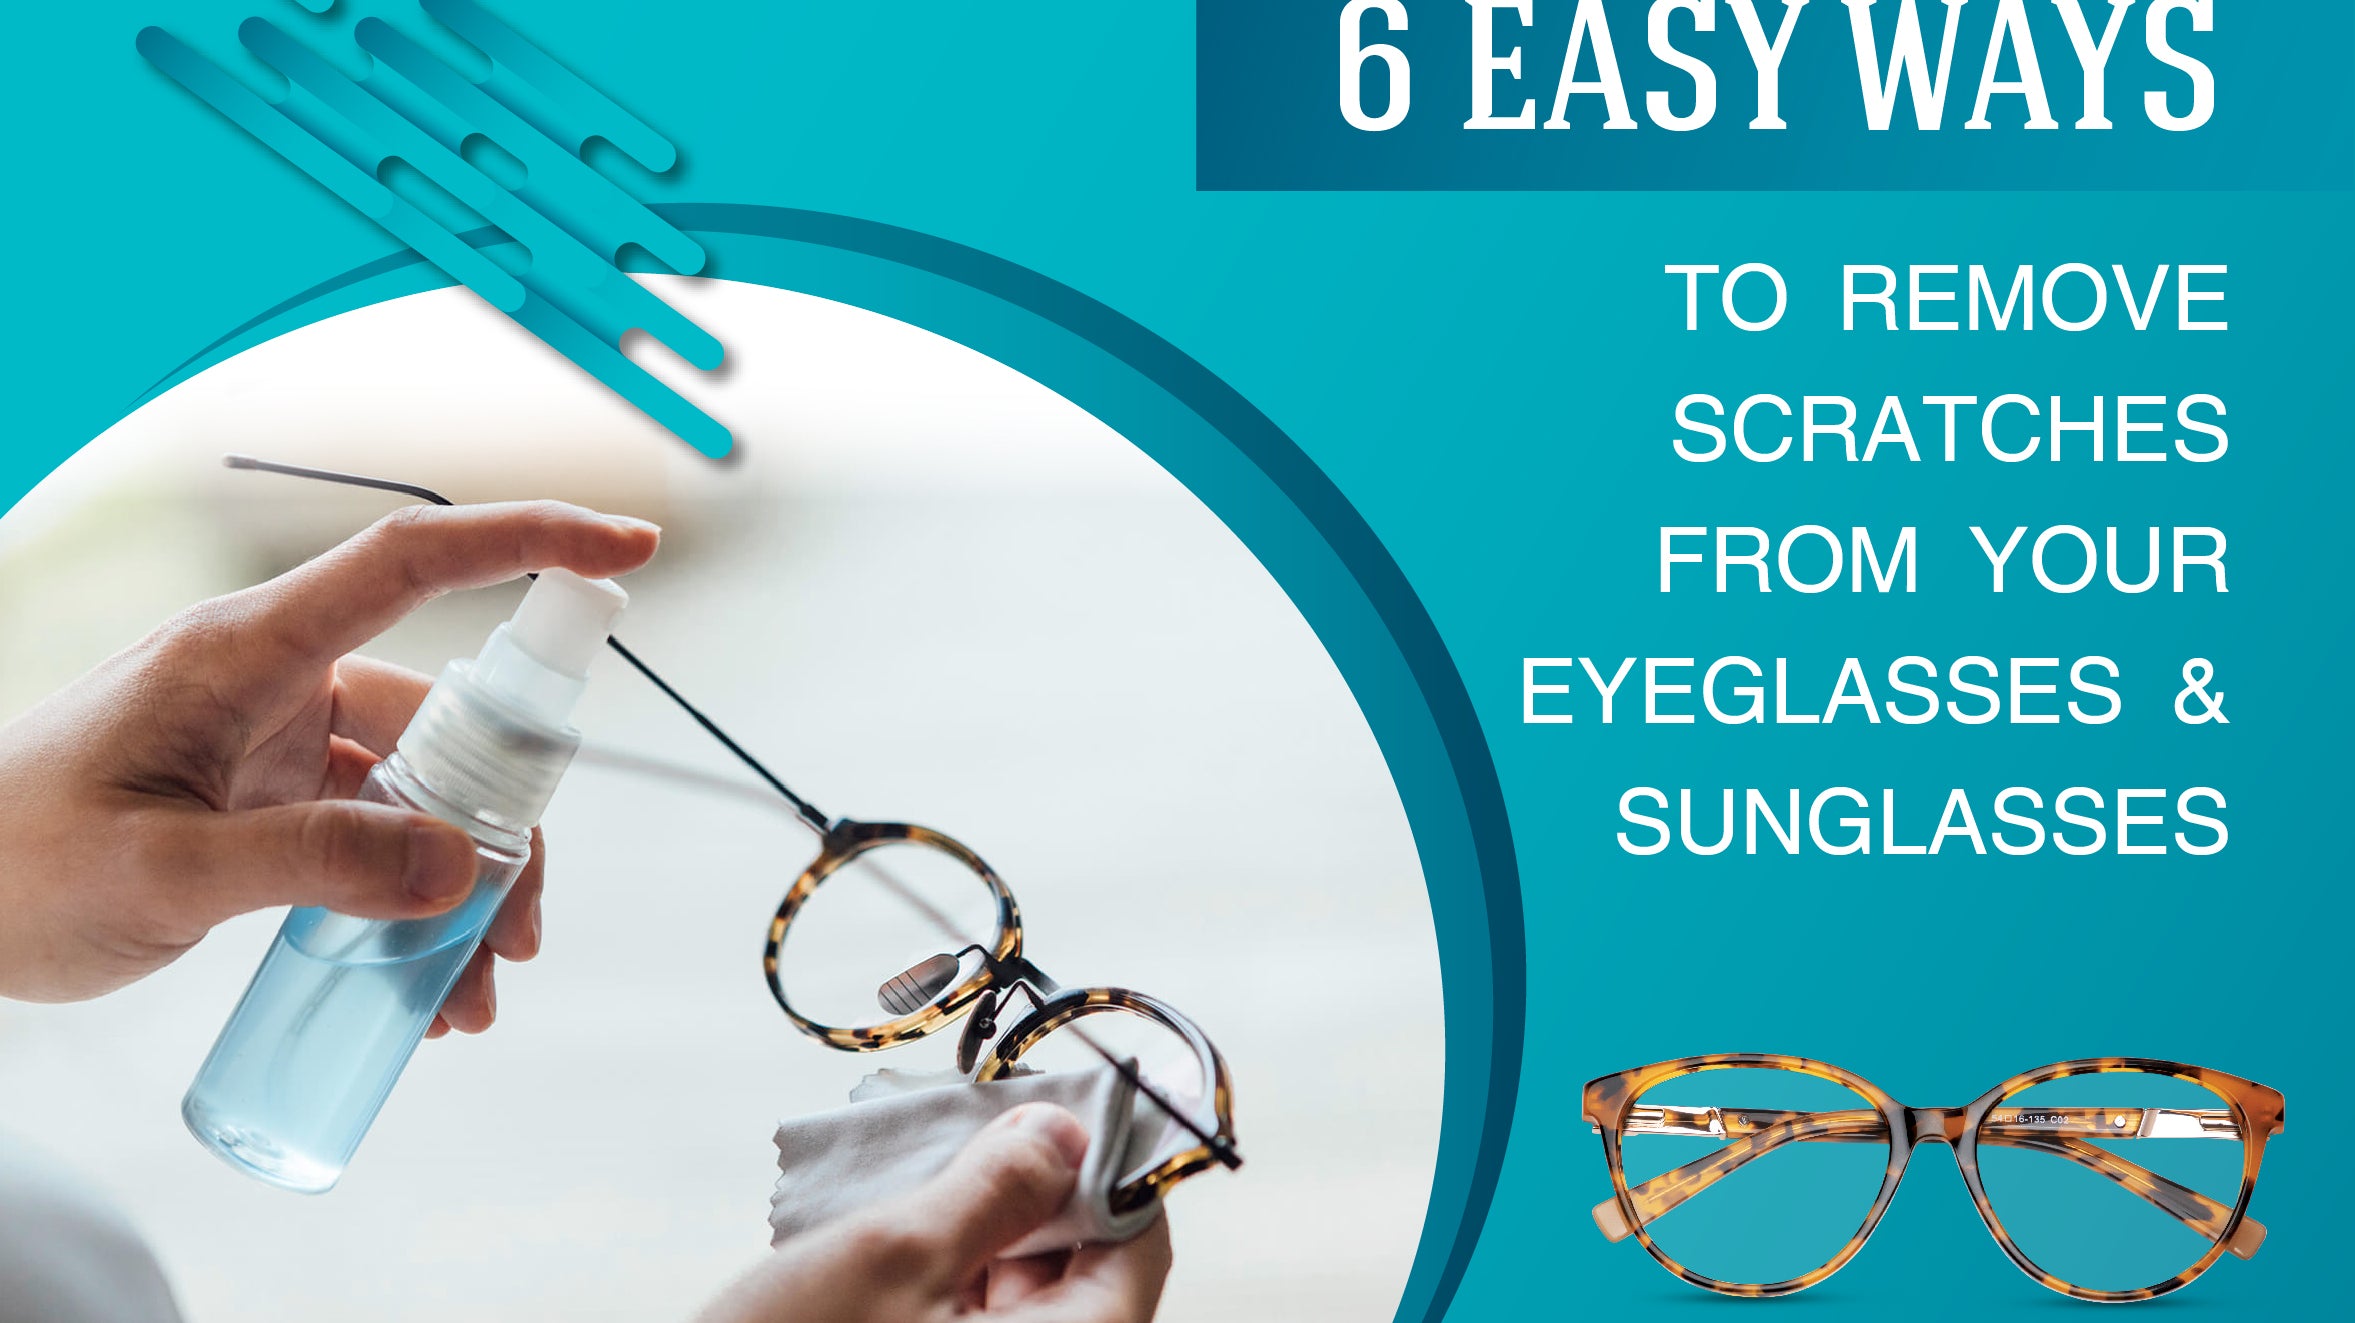 6 easy ways to remove scratches from your eyeglasses and sunglasses